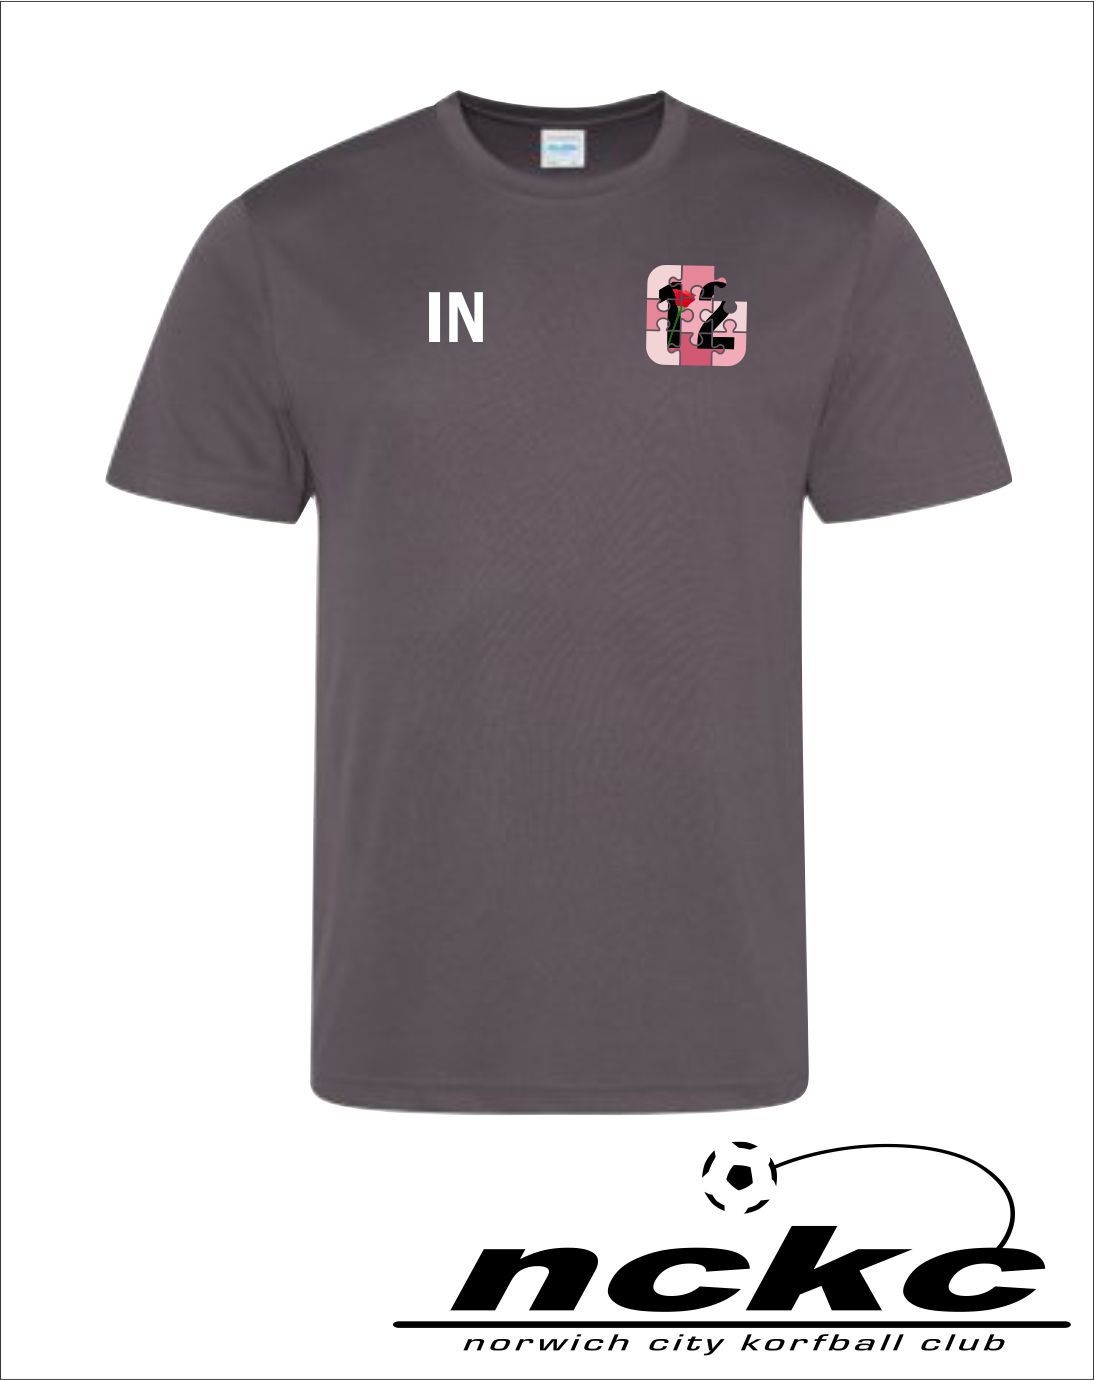 Training Tee Front